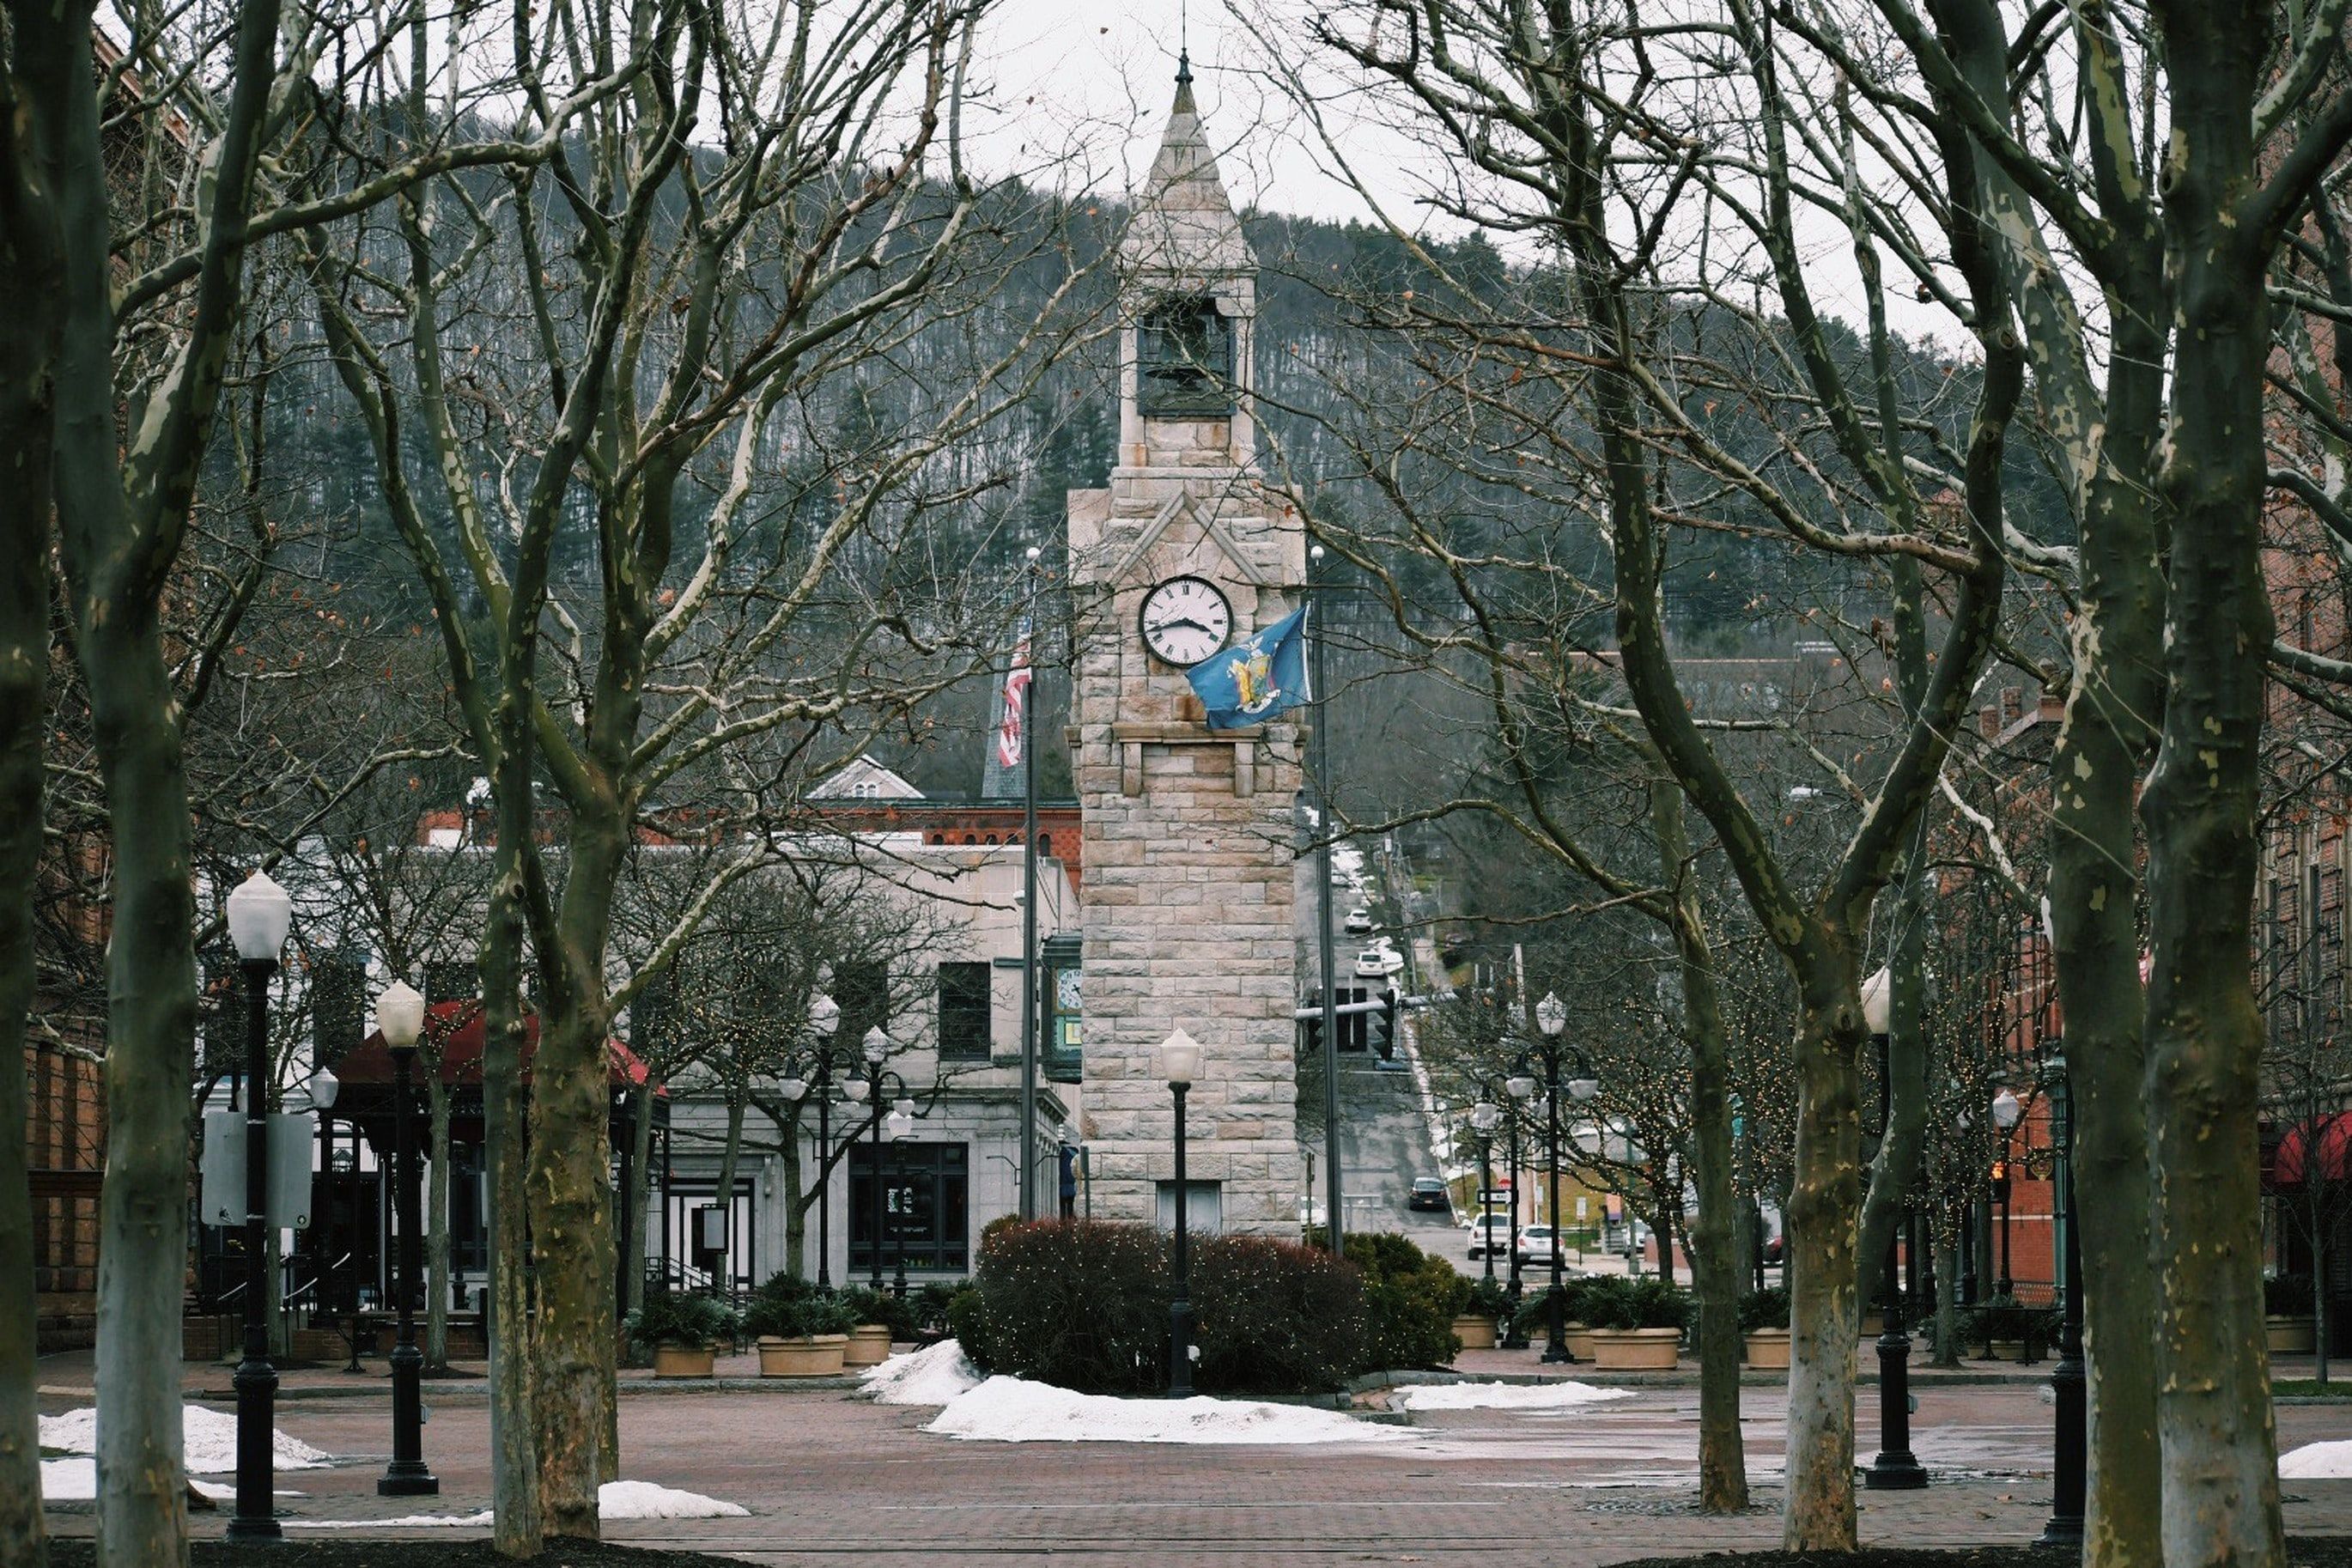 An image of the clocktower in Corning, NY during winter.